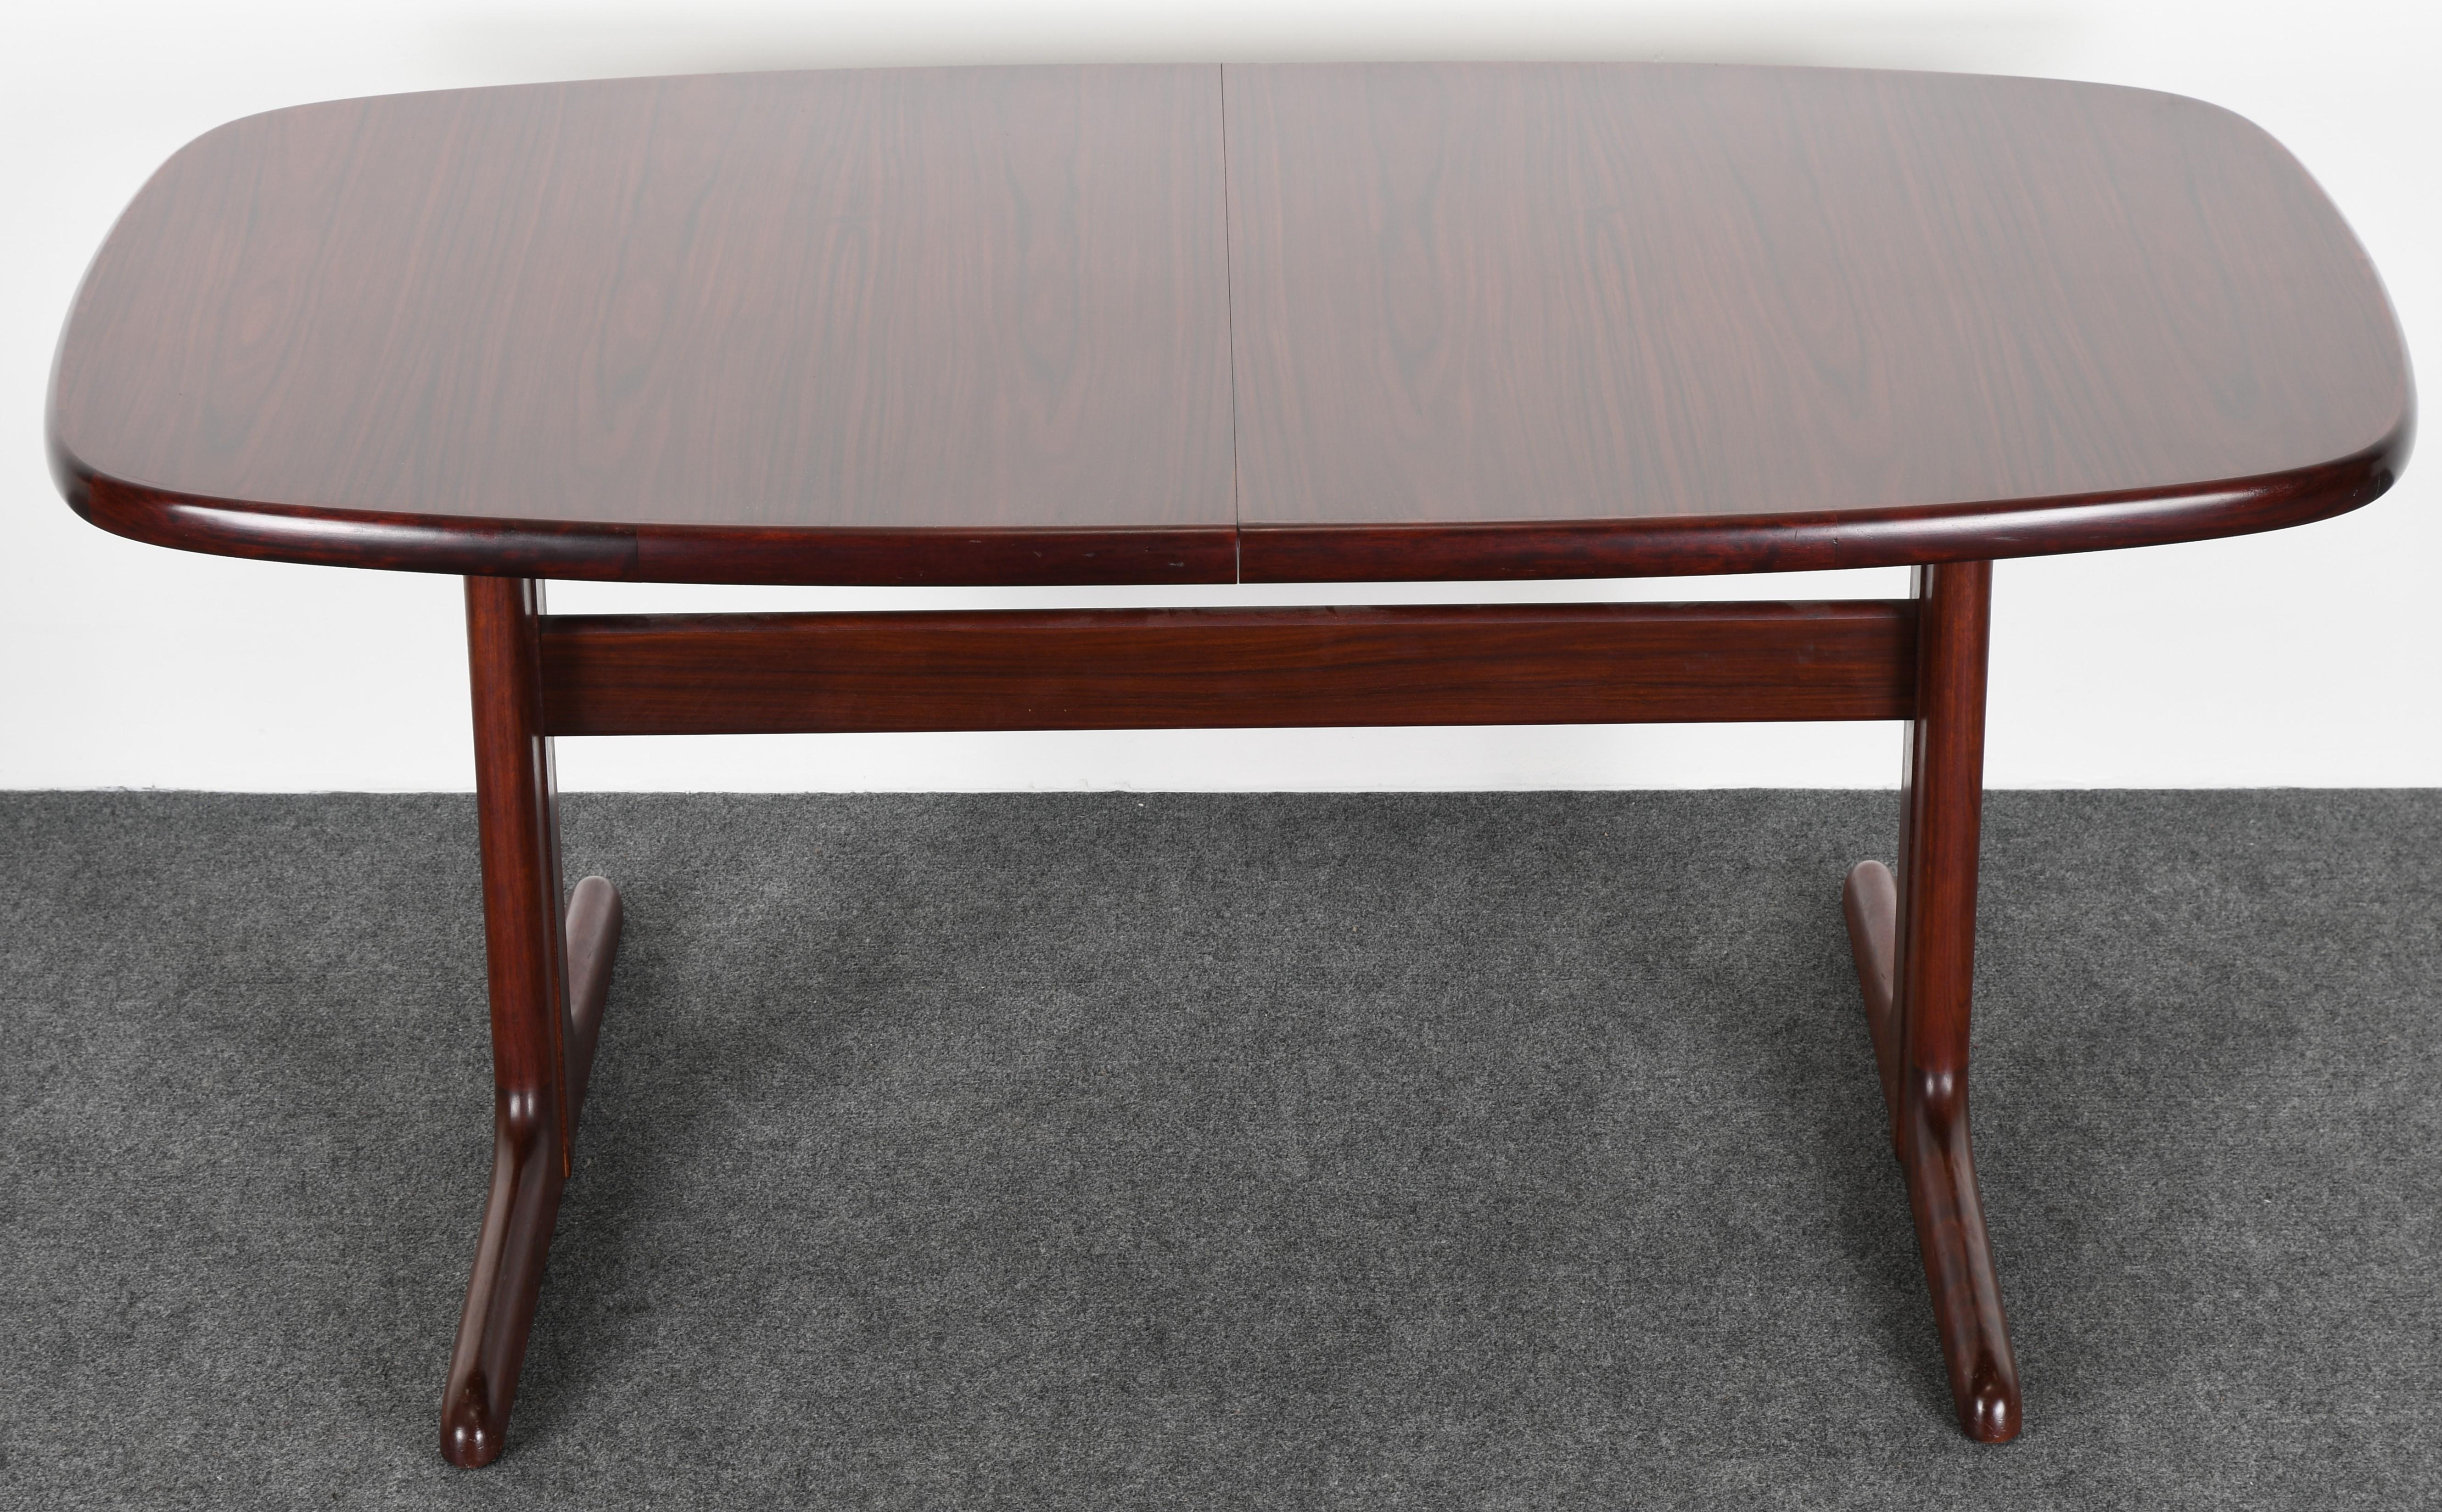 A gorgeous Danish modern rosewood dining room table by Skovby Mobelfabrik A/S. This table has two matching leaves that store underside, as shown in images. It is in very good condition with age appropriate wear. Several small imperfections, not